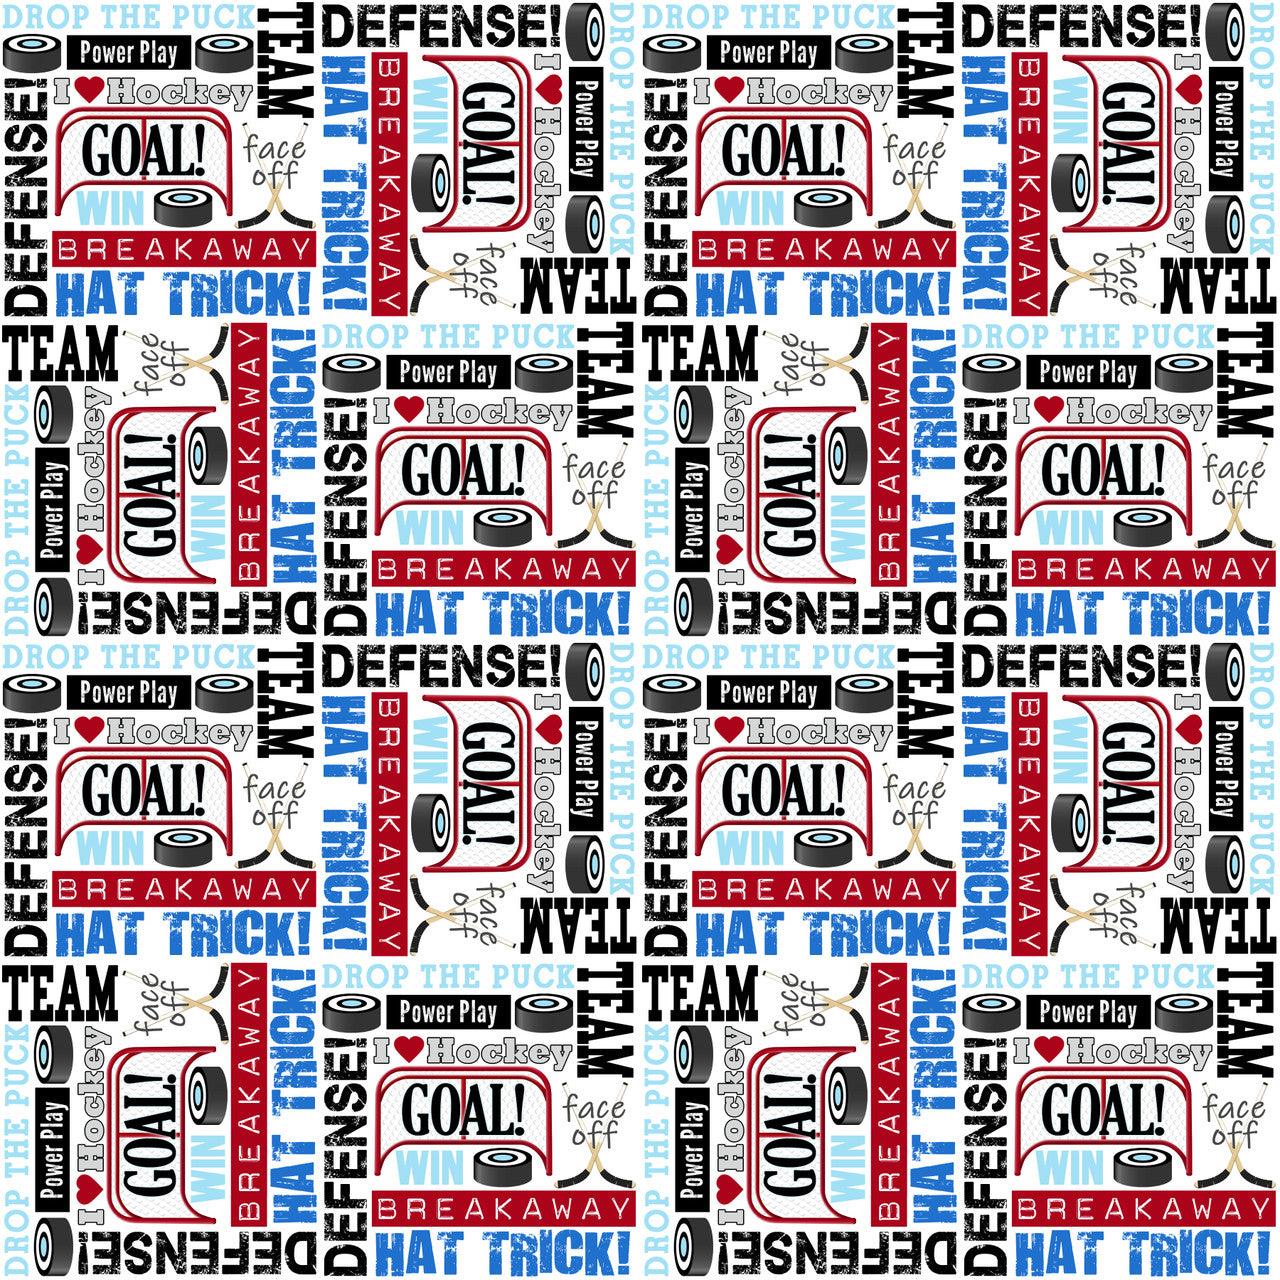 Drop The Puck Collection Hockey Collage 12 x 12 Double-Sided Scrapbook Paper by SSC Designs - Scrapbook Supply Companies